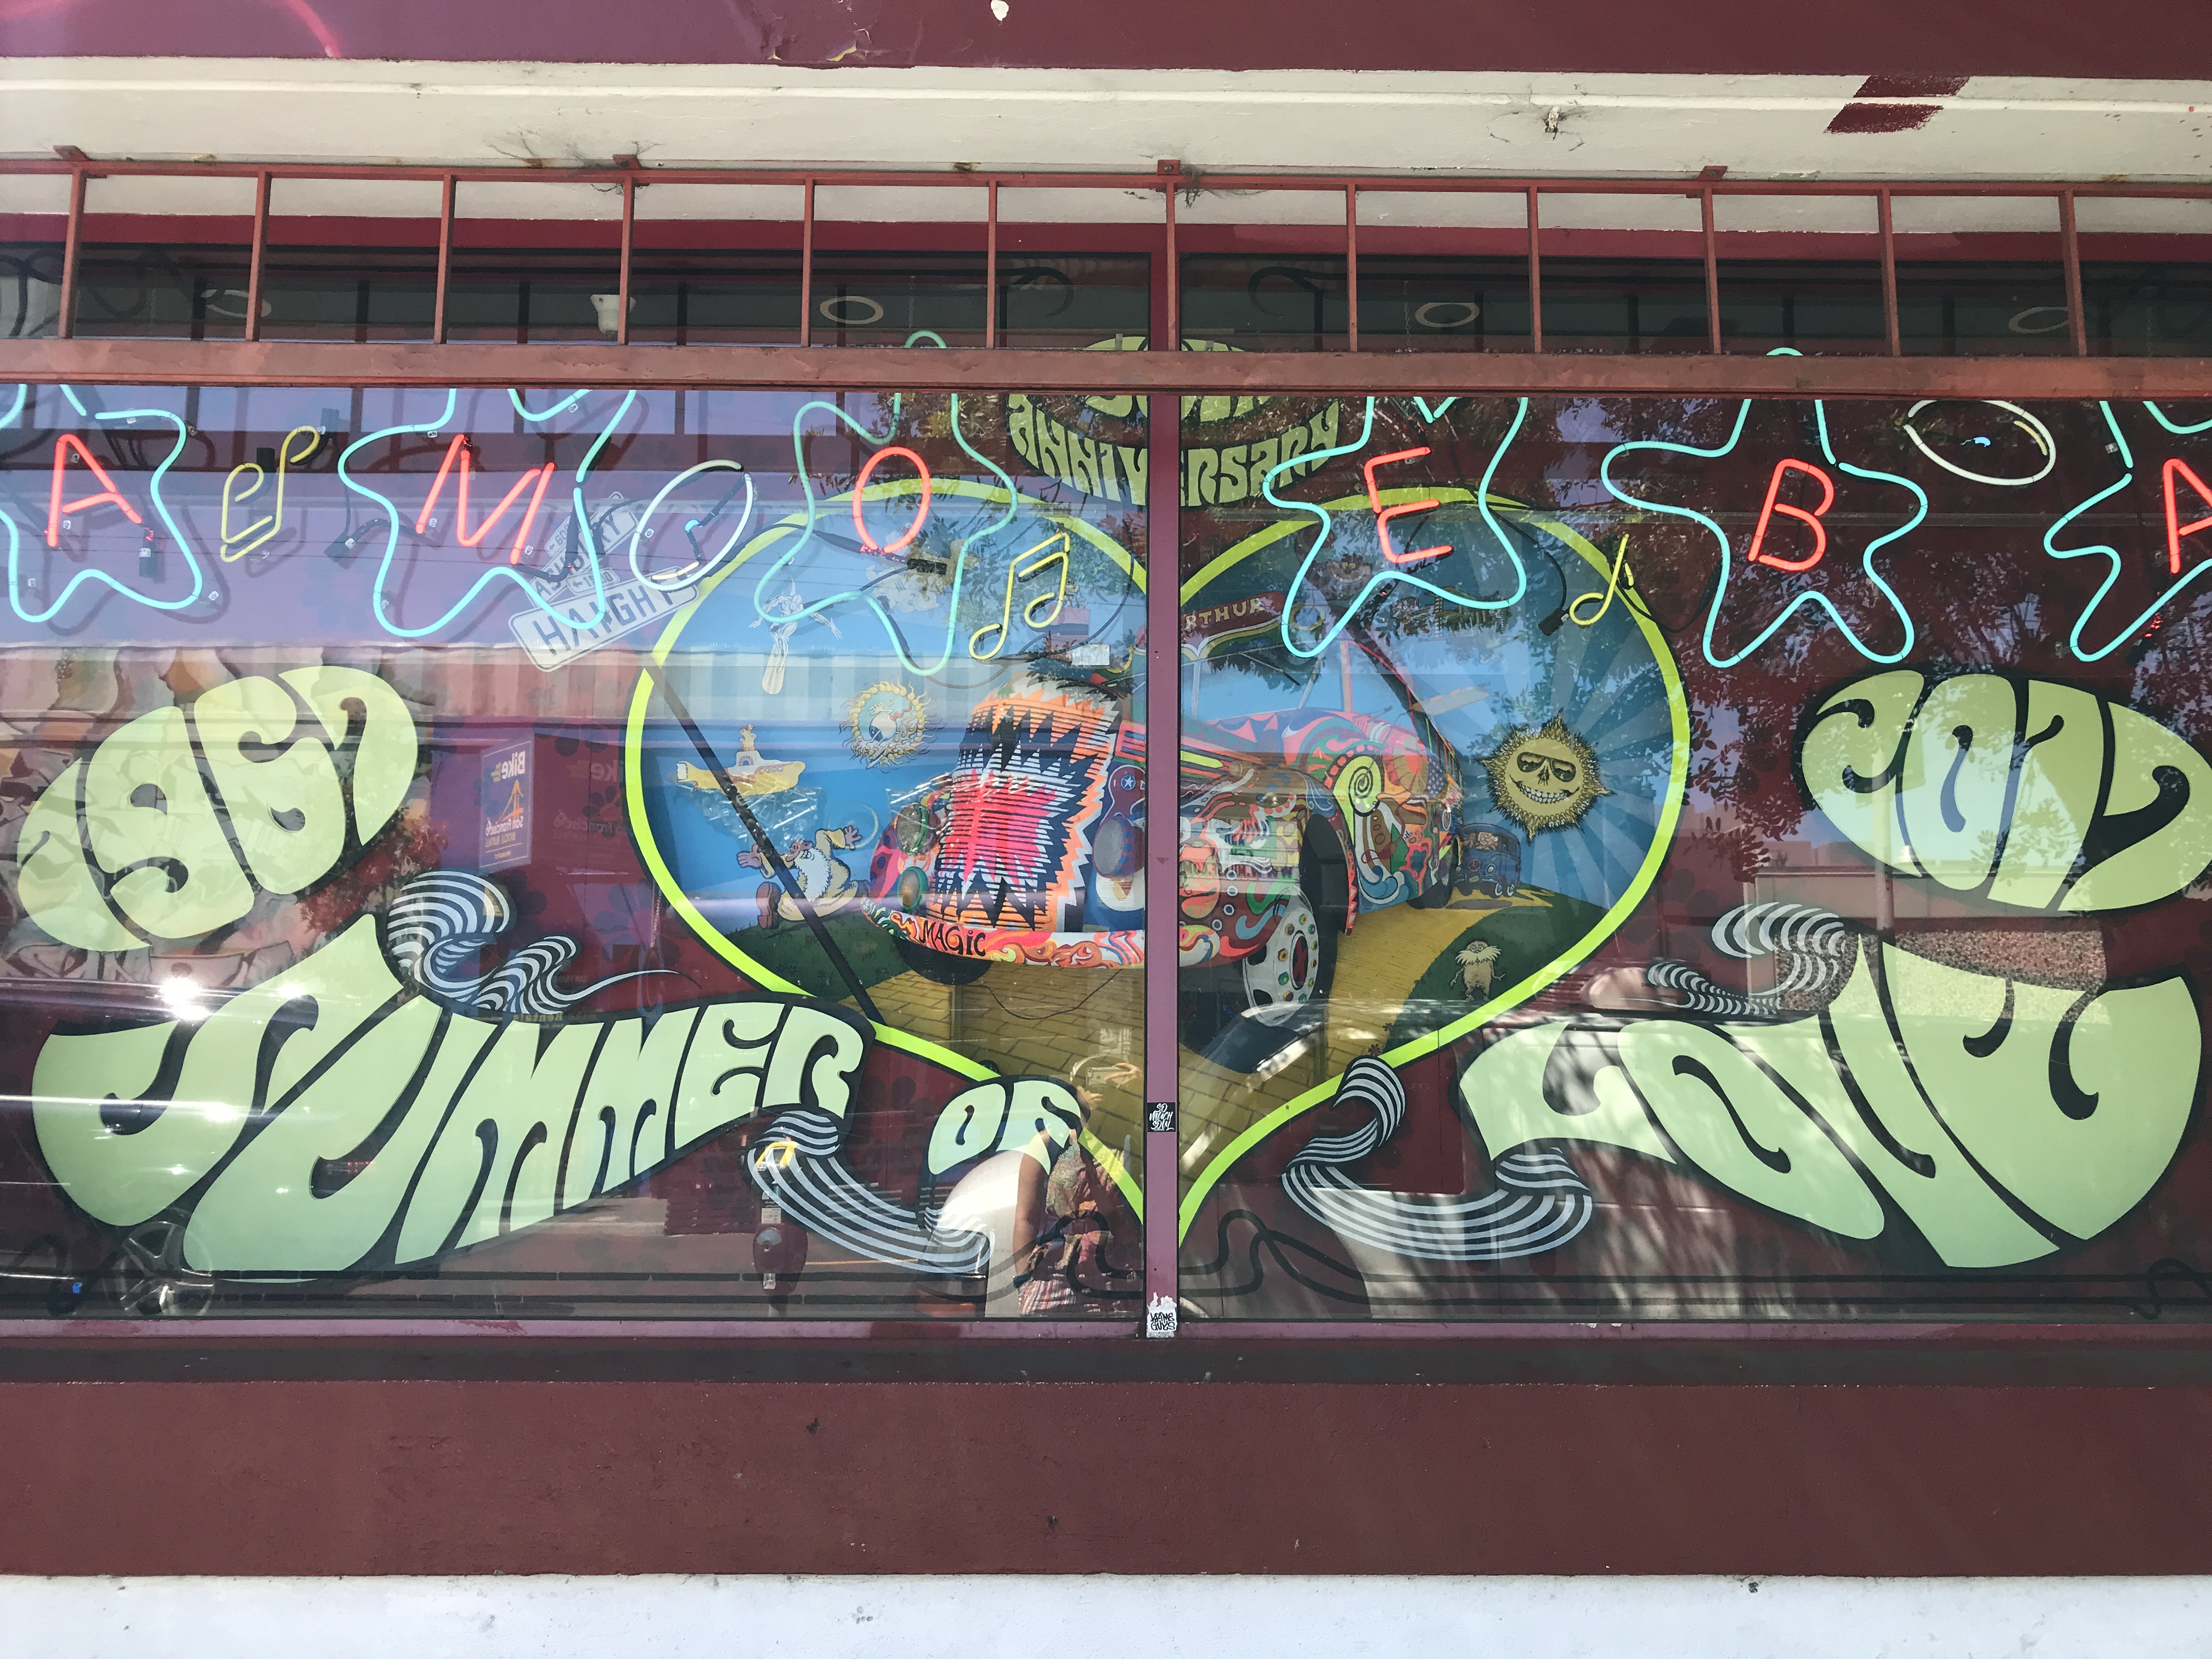 A psychedelic summer of love art in front of Amoeba Music in the Haight-Ashbury District, San Francisco, California, United States of America